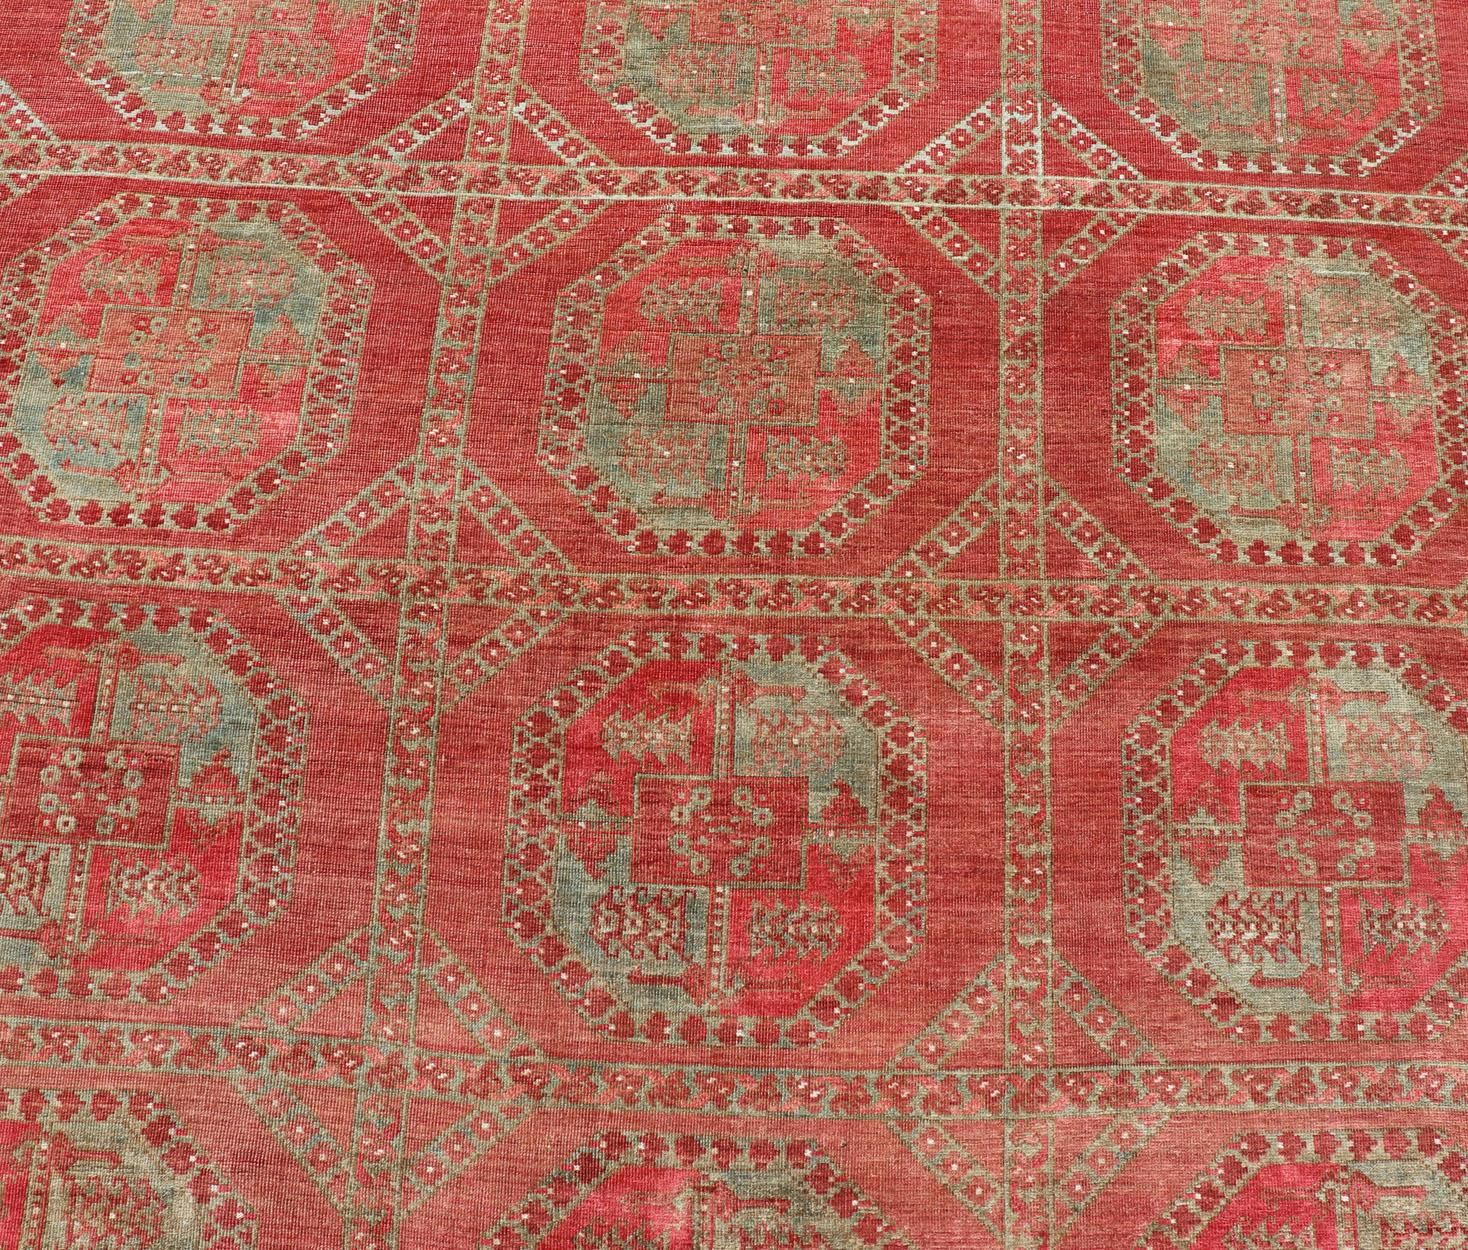 Hand-Knotted Wool Ersari Rug in Wool with Gul Design in Shades of Red & Green 4